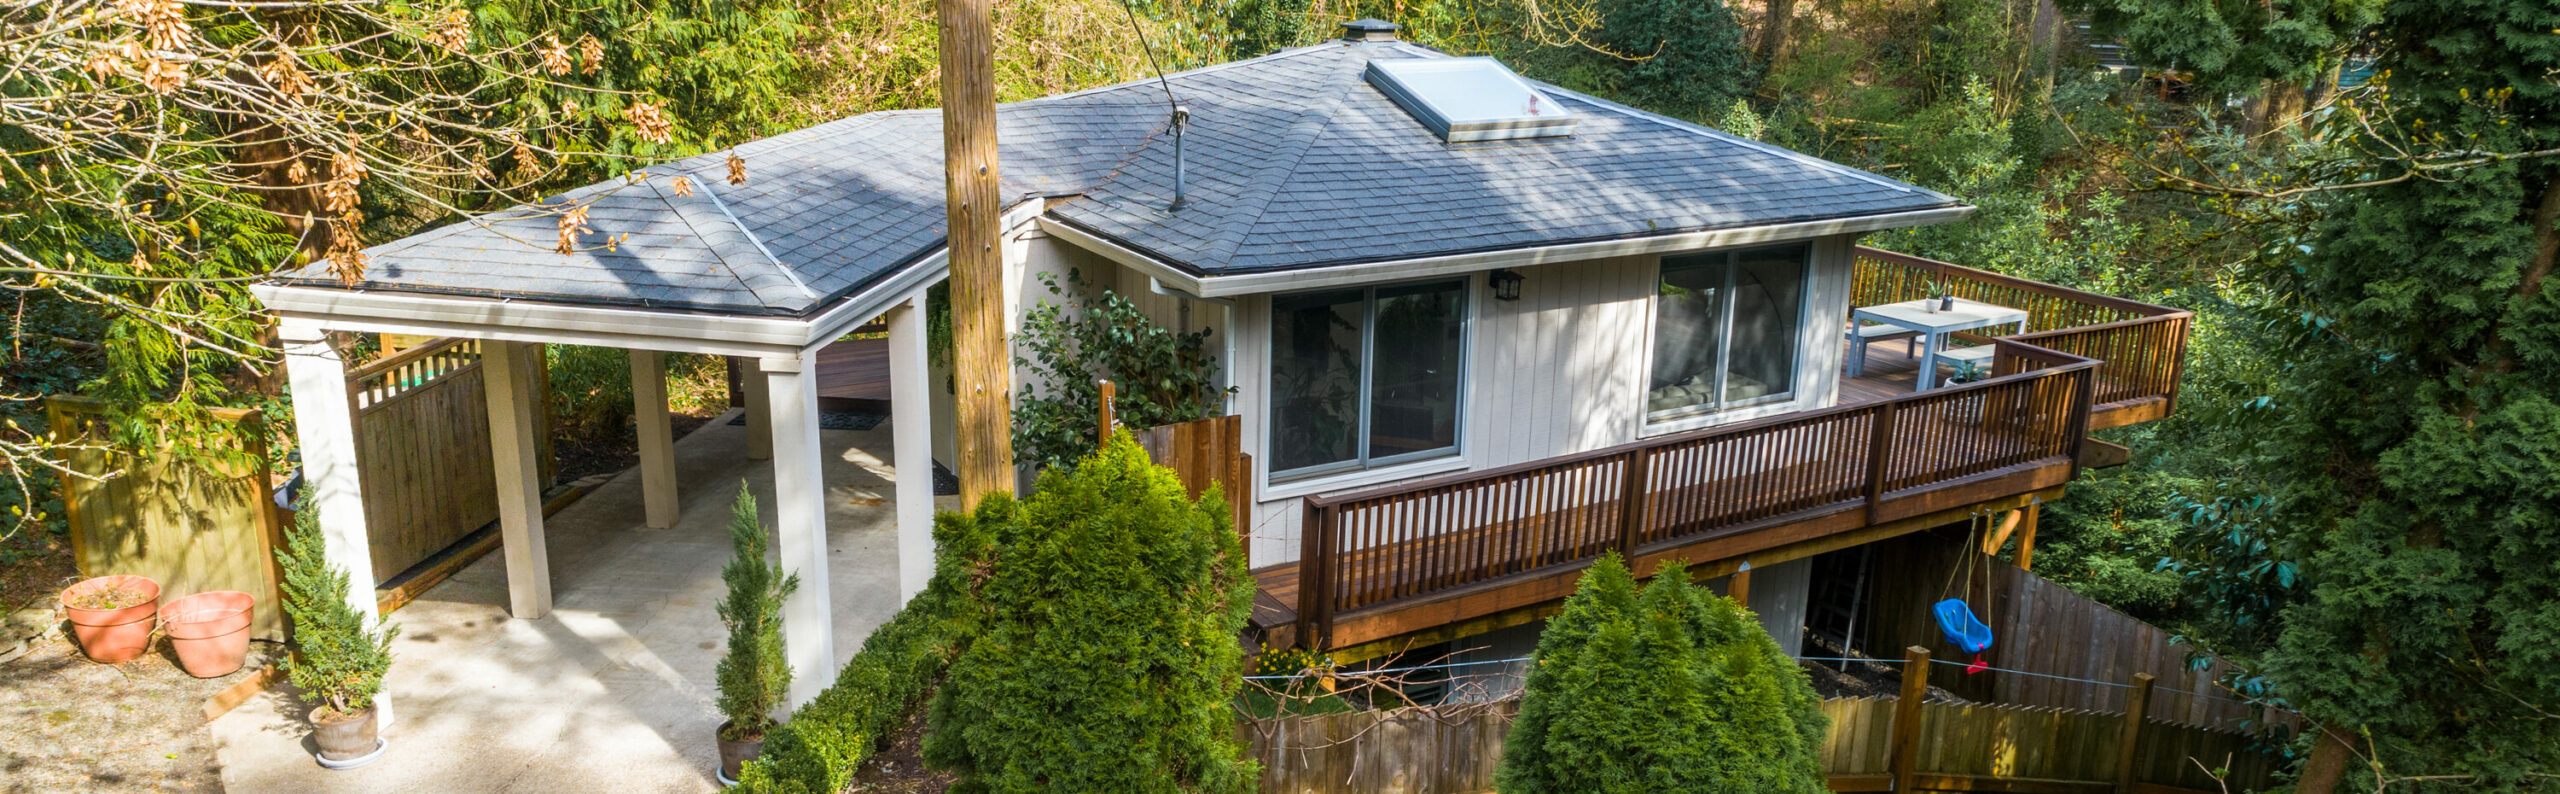 Just Listed! Quiet and Quaint Contemporary Cutie!